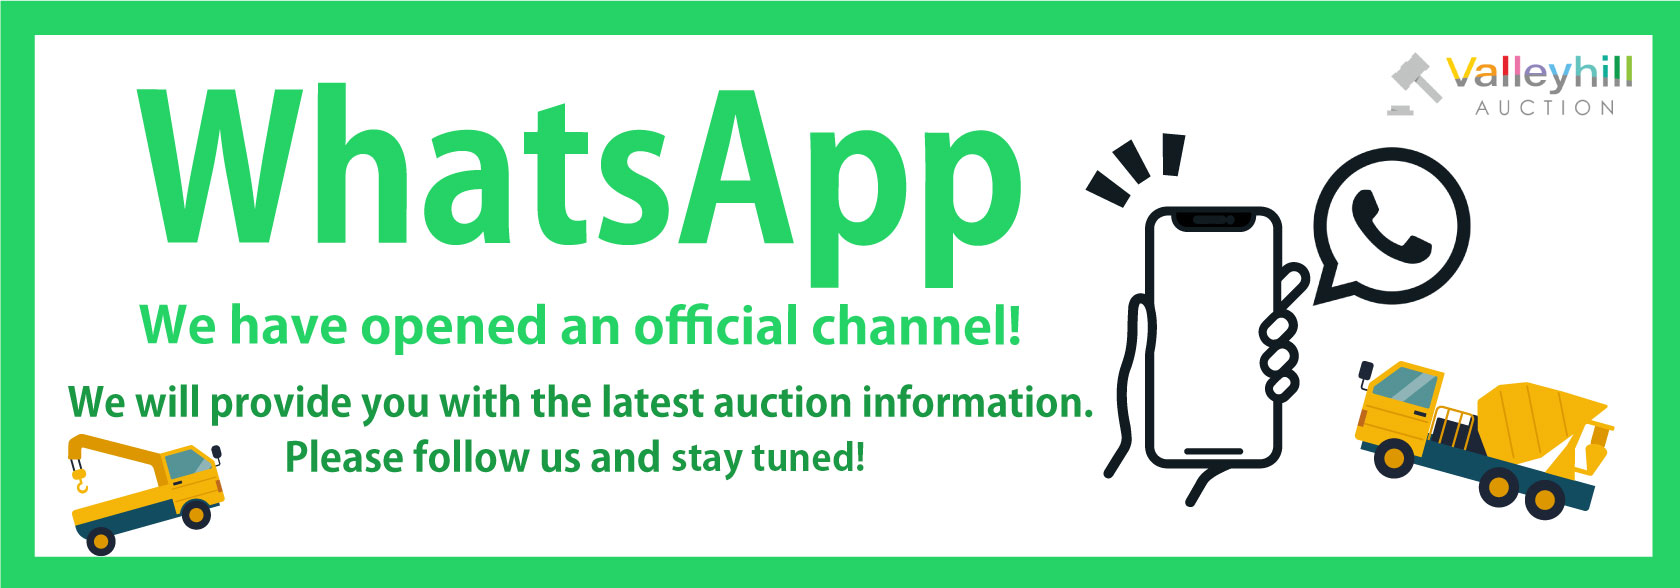 We have opened an official WhatsApp channel! We will deliver the latest information about our auctions. Please follow us and stay tuned!